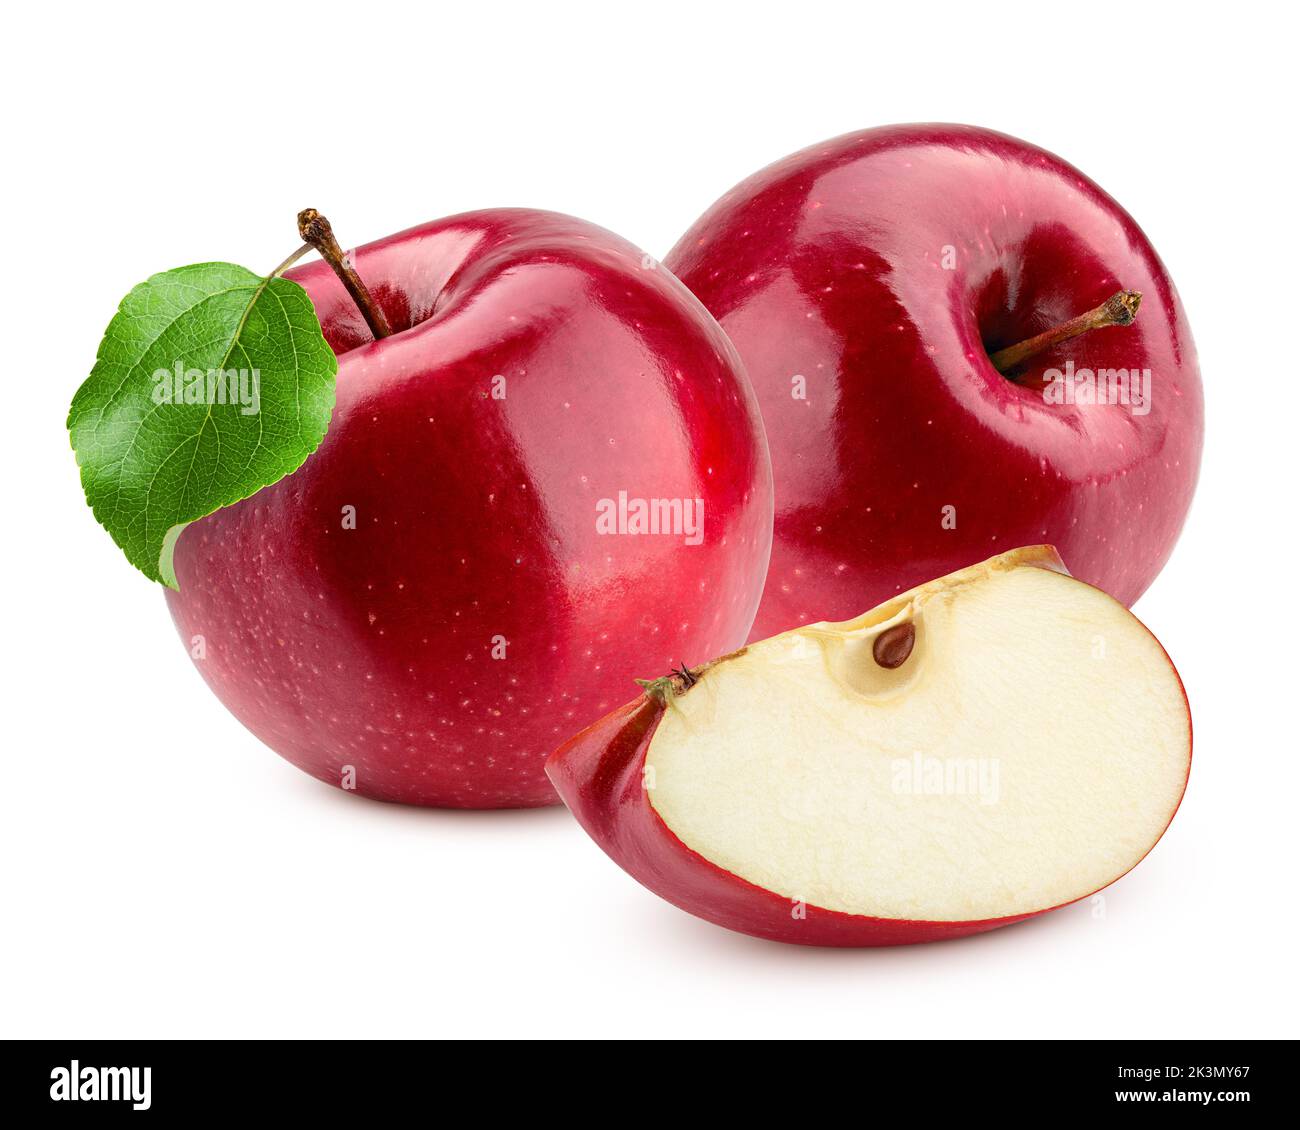 Free art print of Red Apple isolated with clipping path